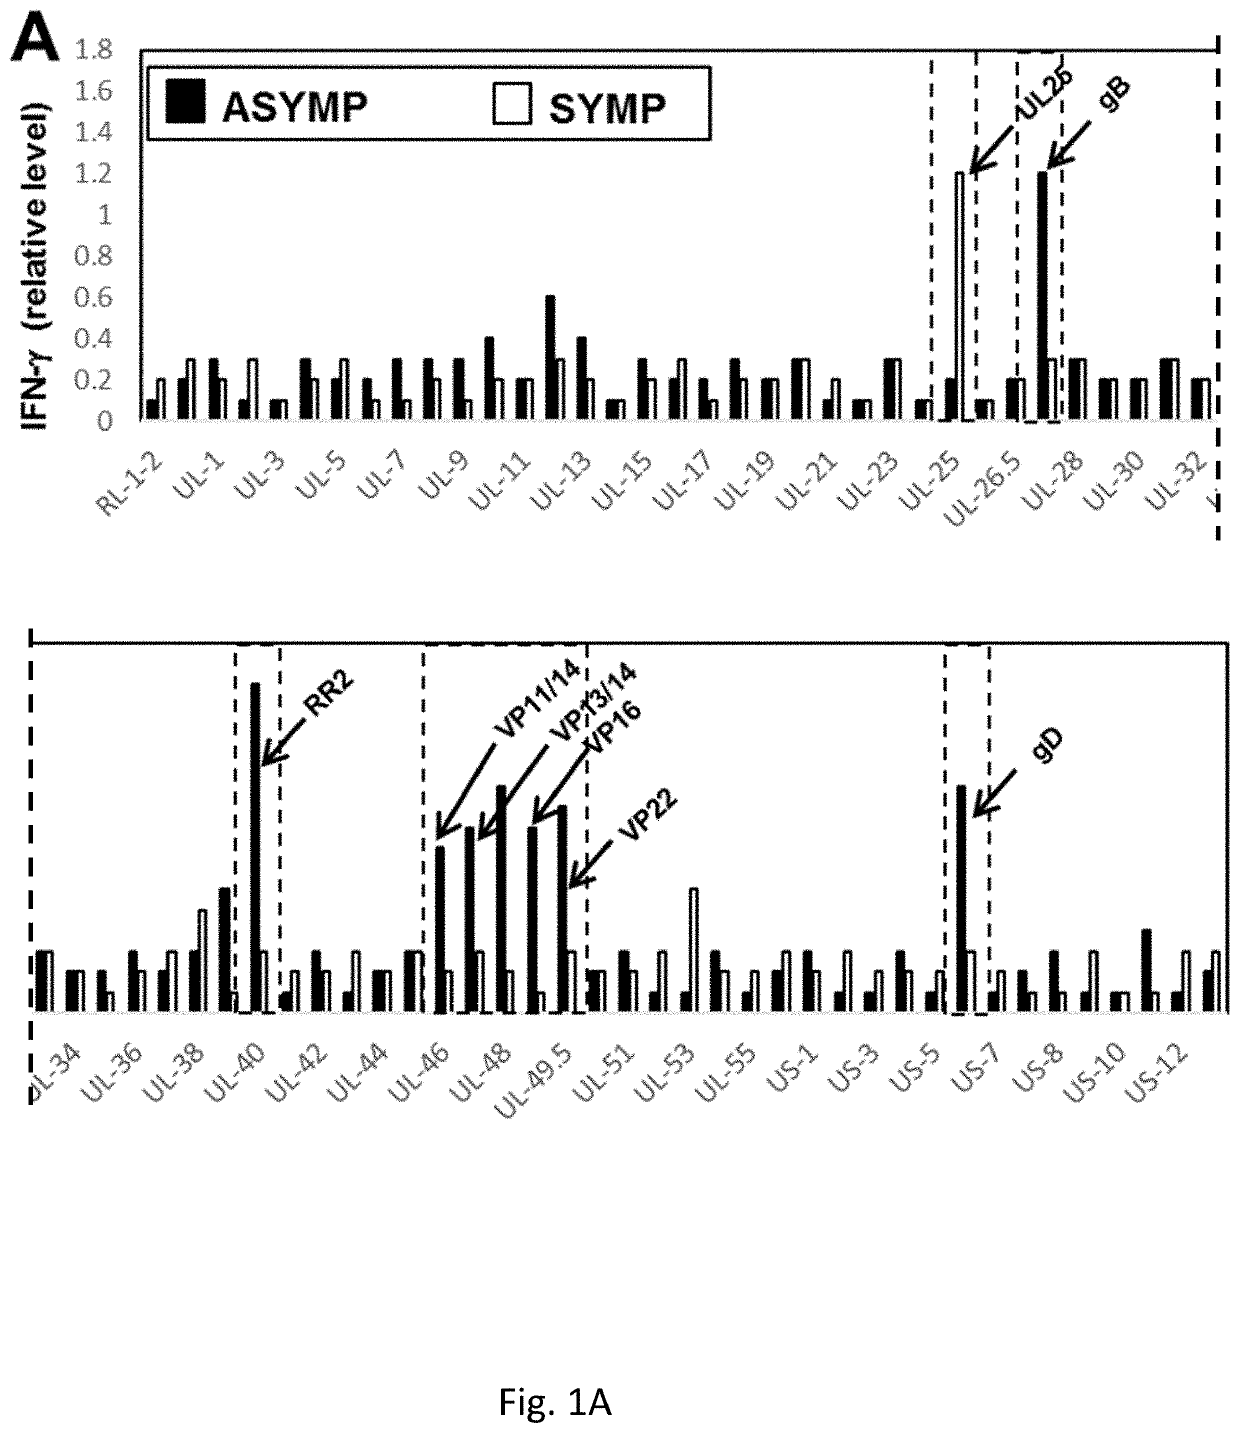 Protection Against Recurrent Genital Herpes by Therapeutic Immunization with Herpes simplex virus type 2 Ribonucleotide Reductase Protein Subunits